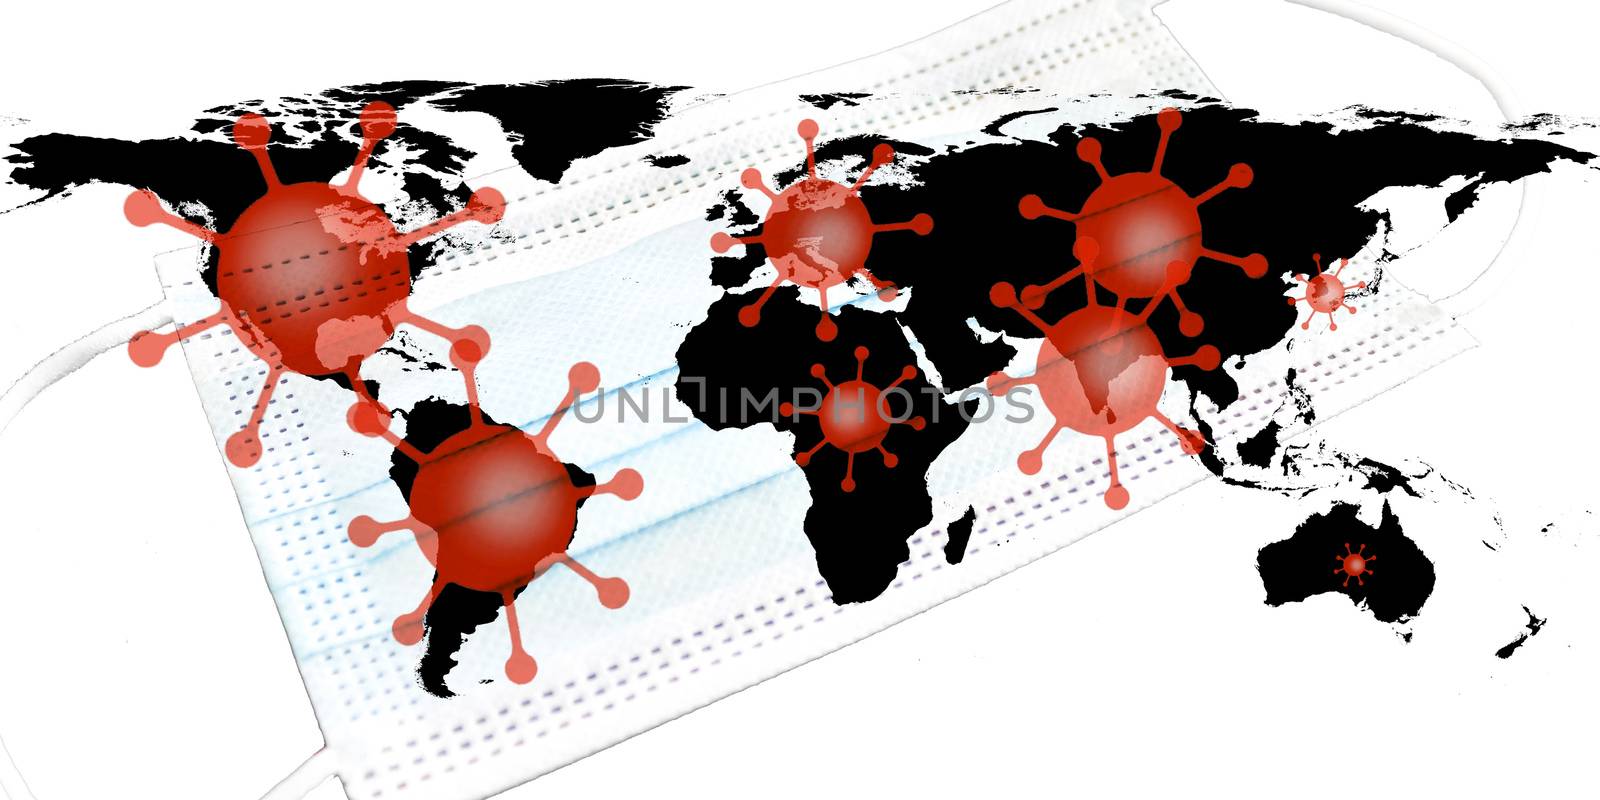 Illutration of a world map showing corona virus hotspots in the USA, Brazil, India, Europe and russia with a medical protection mask